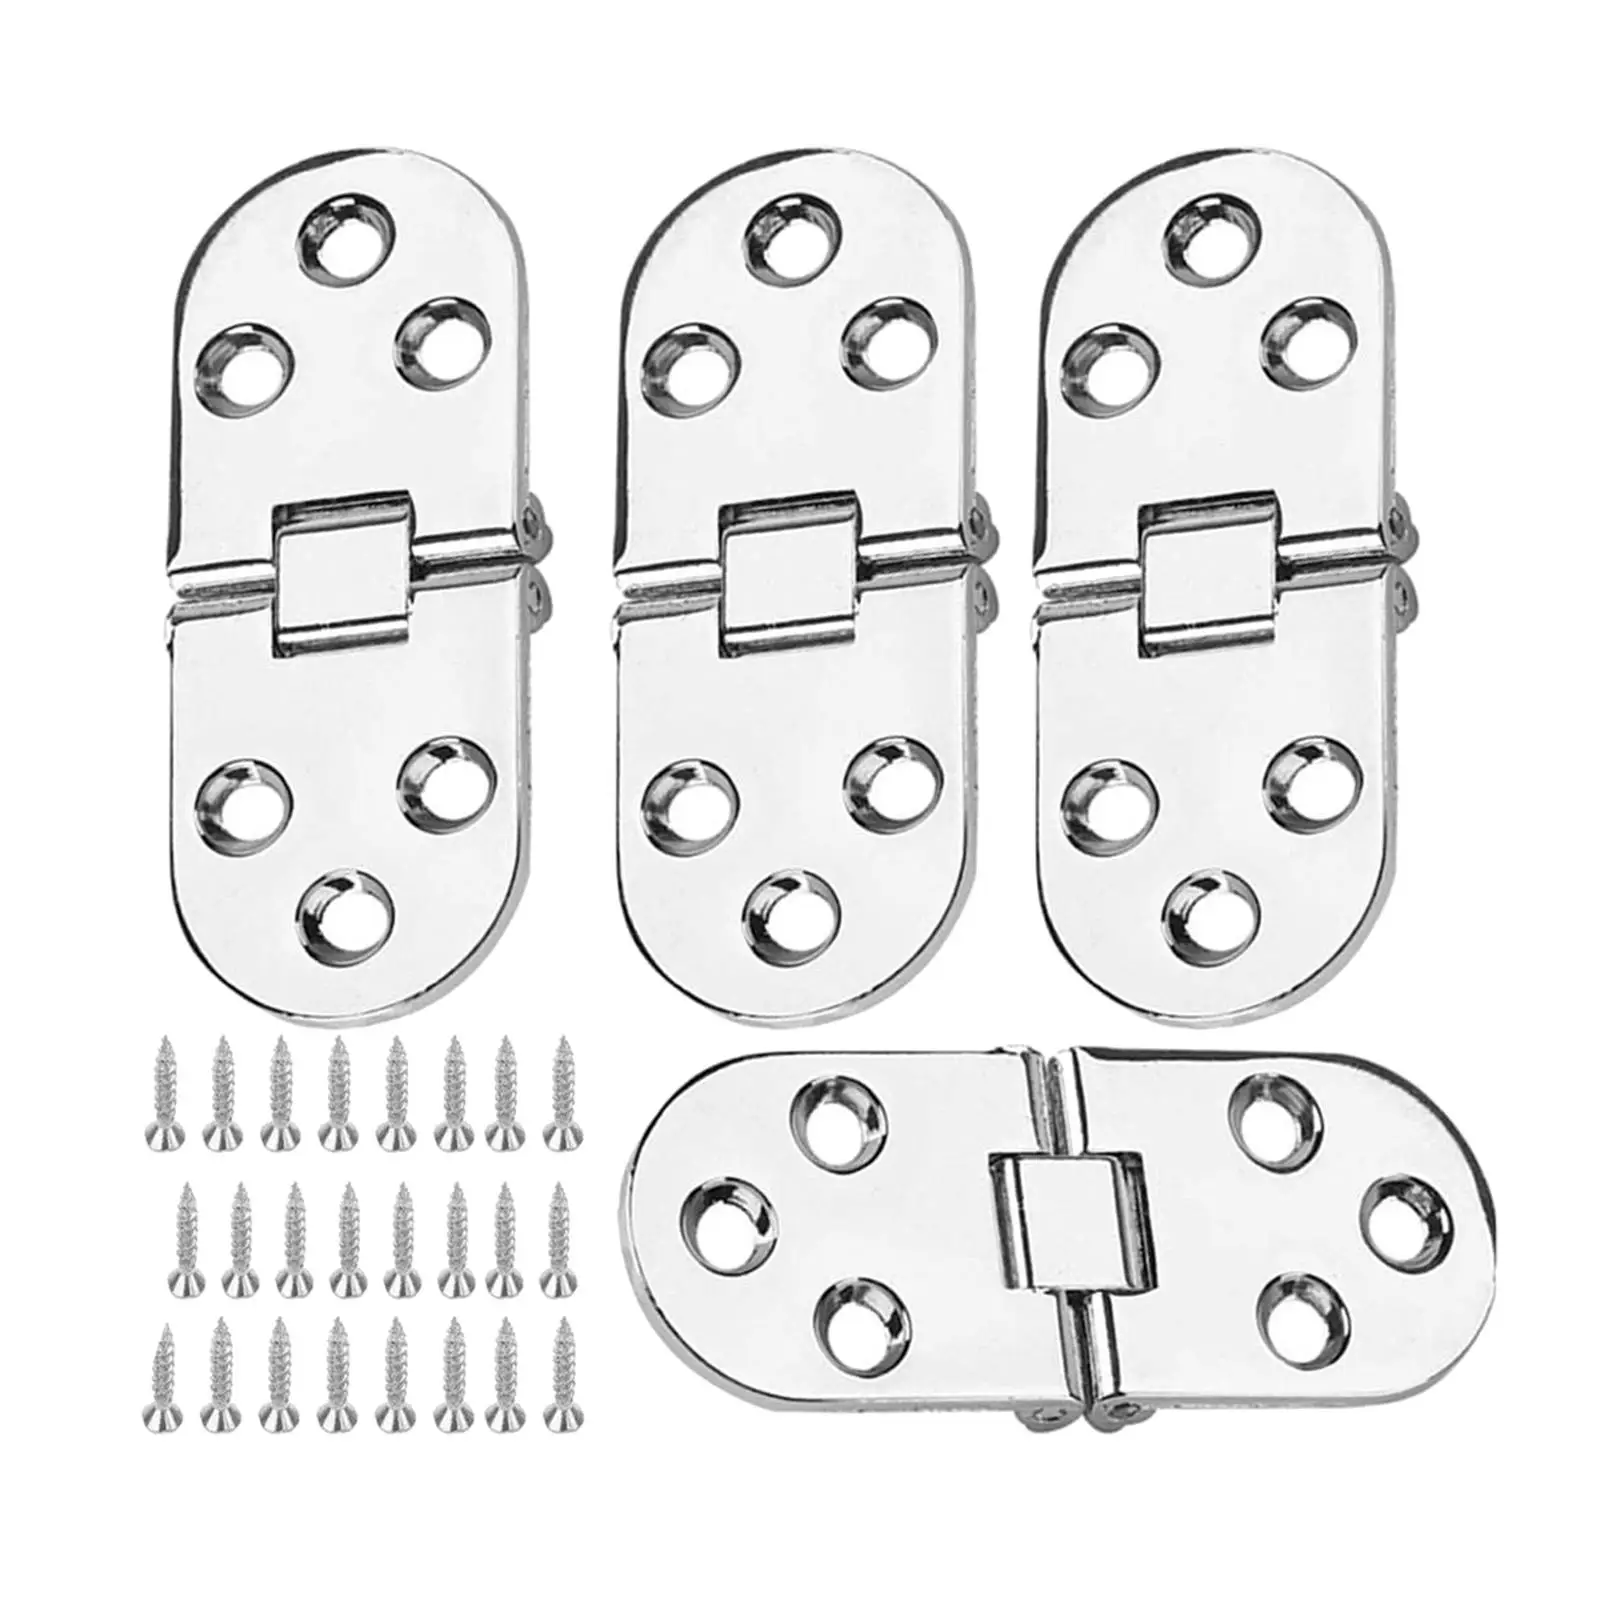 4x Rounded Stainless Furniture Hinges Fittings Stable Premium Spare Parts